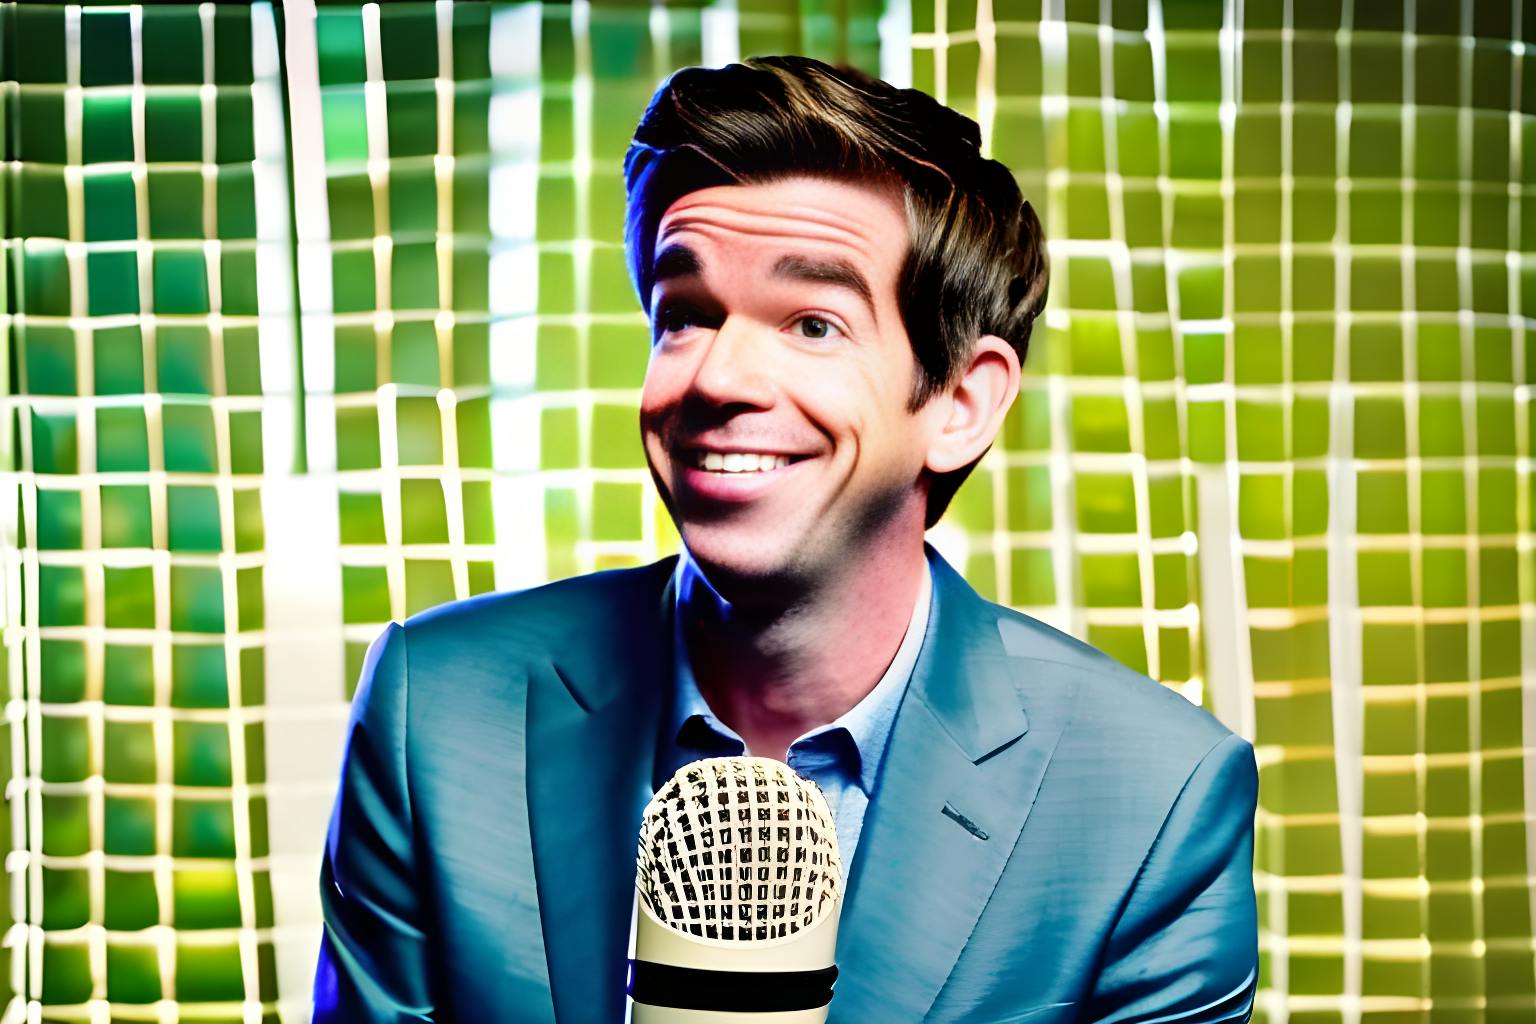 /the-role-of-pathos-logos-and-ethos-in-business-storytelling-and-john-mulaney feature image